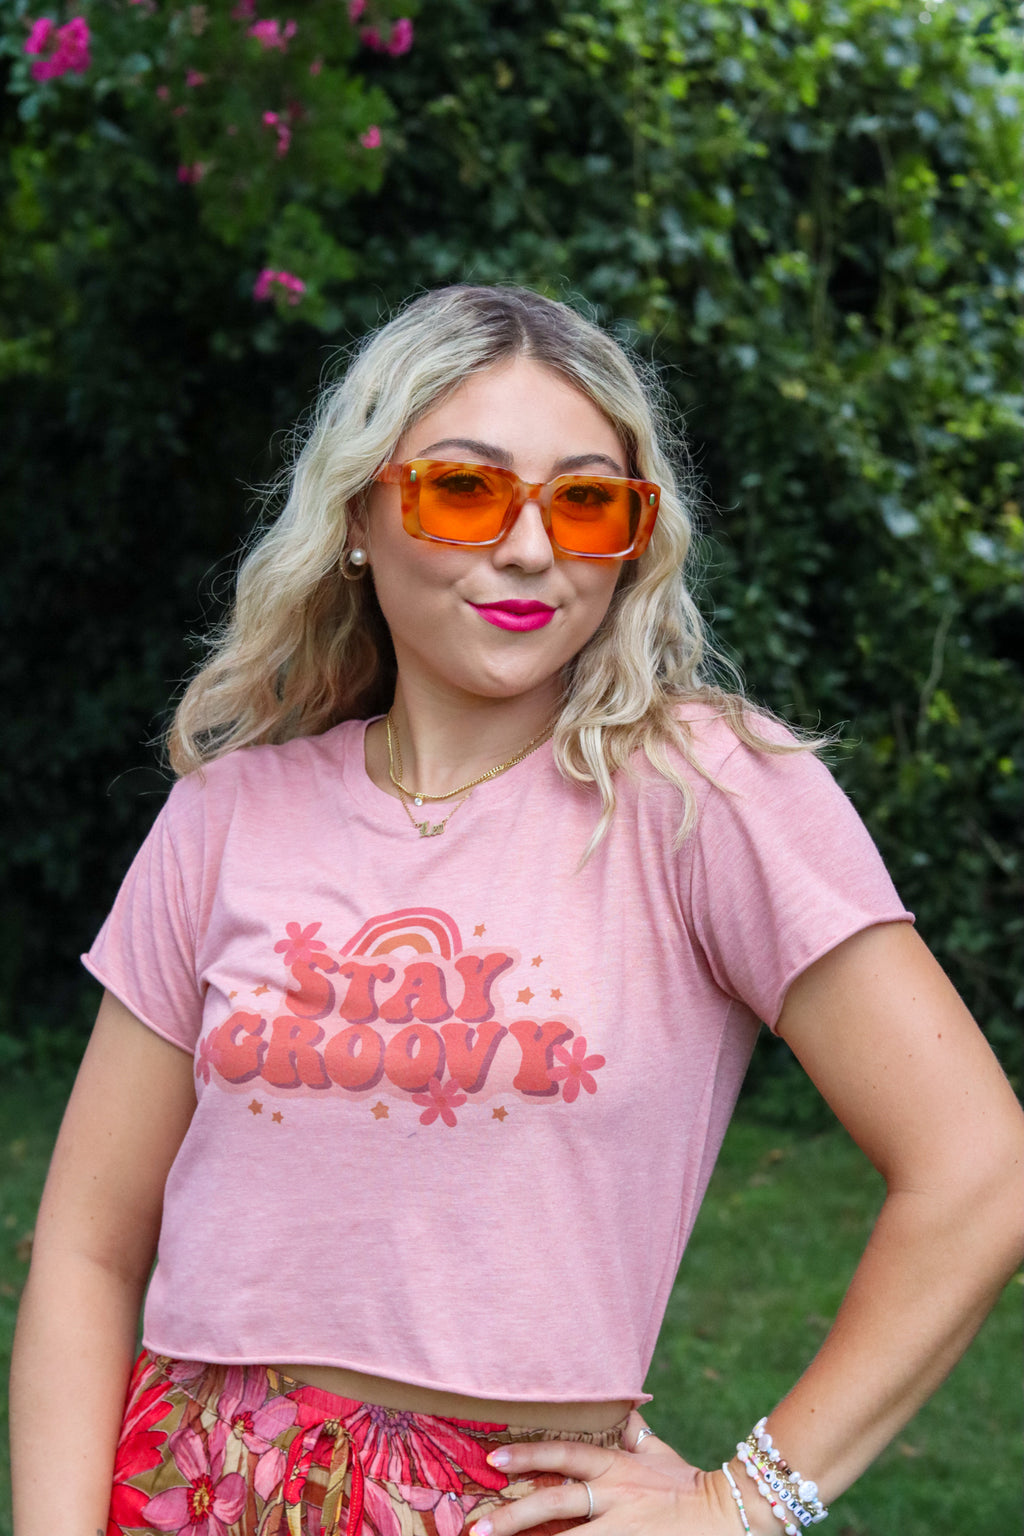 STAY GROOVY, GRAPHIC TEE, BACHELORETTE, NASHVILLE, CALIFORNIA, RETRO STYLE, BOUTIQUE, THEALLYCATWALK